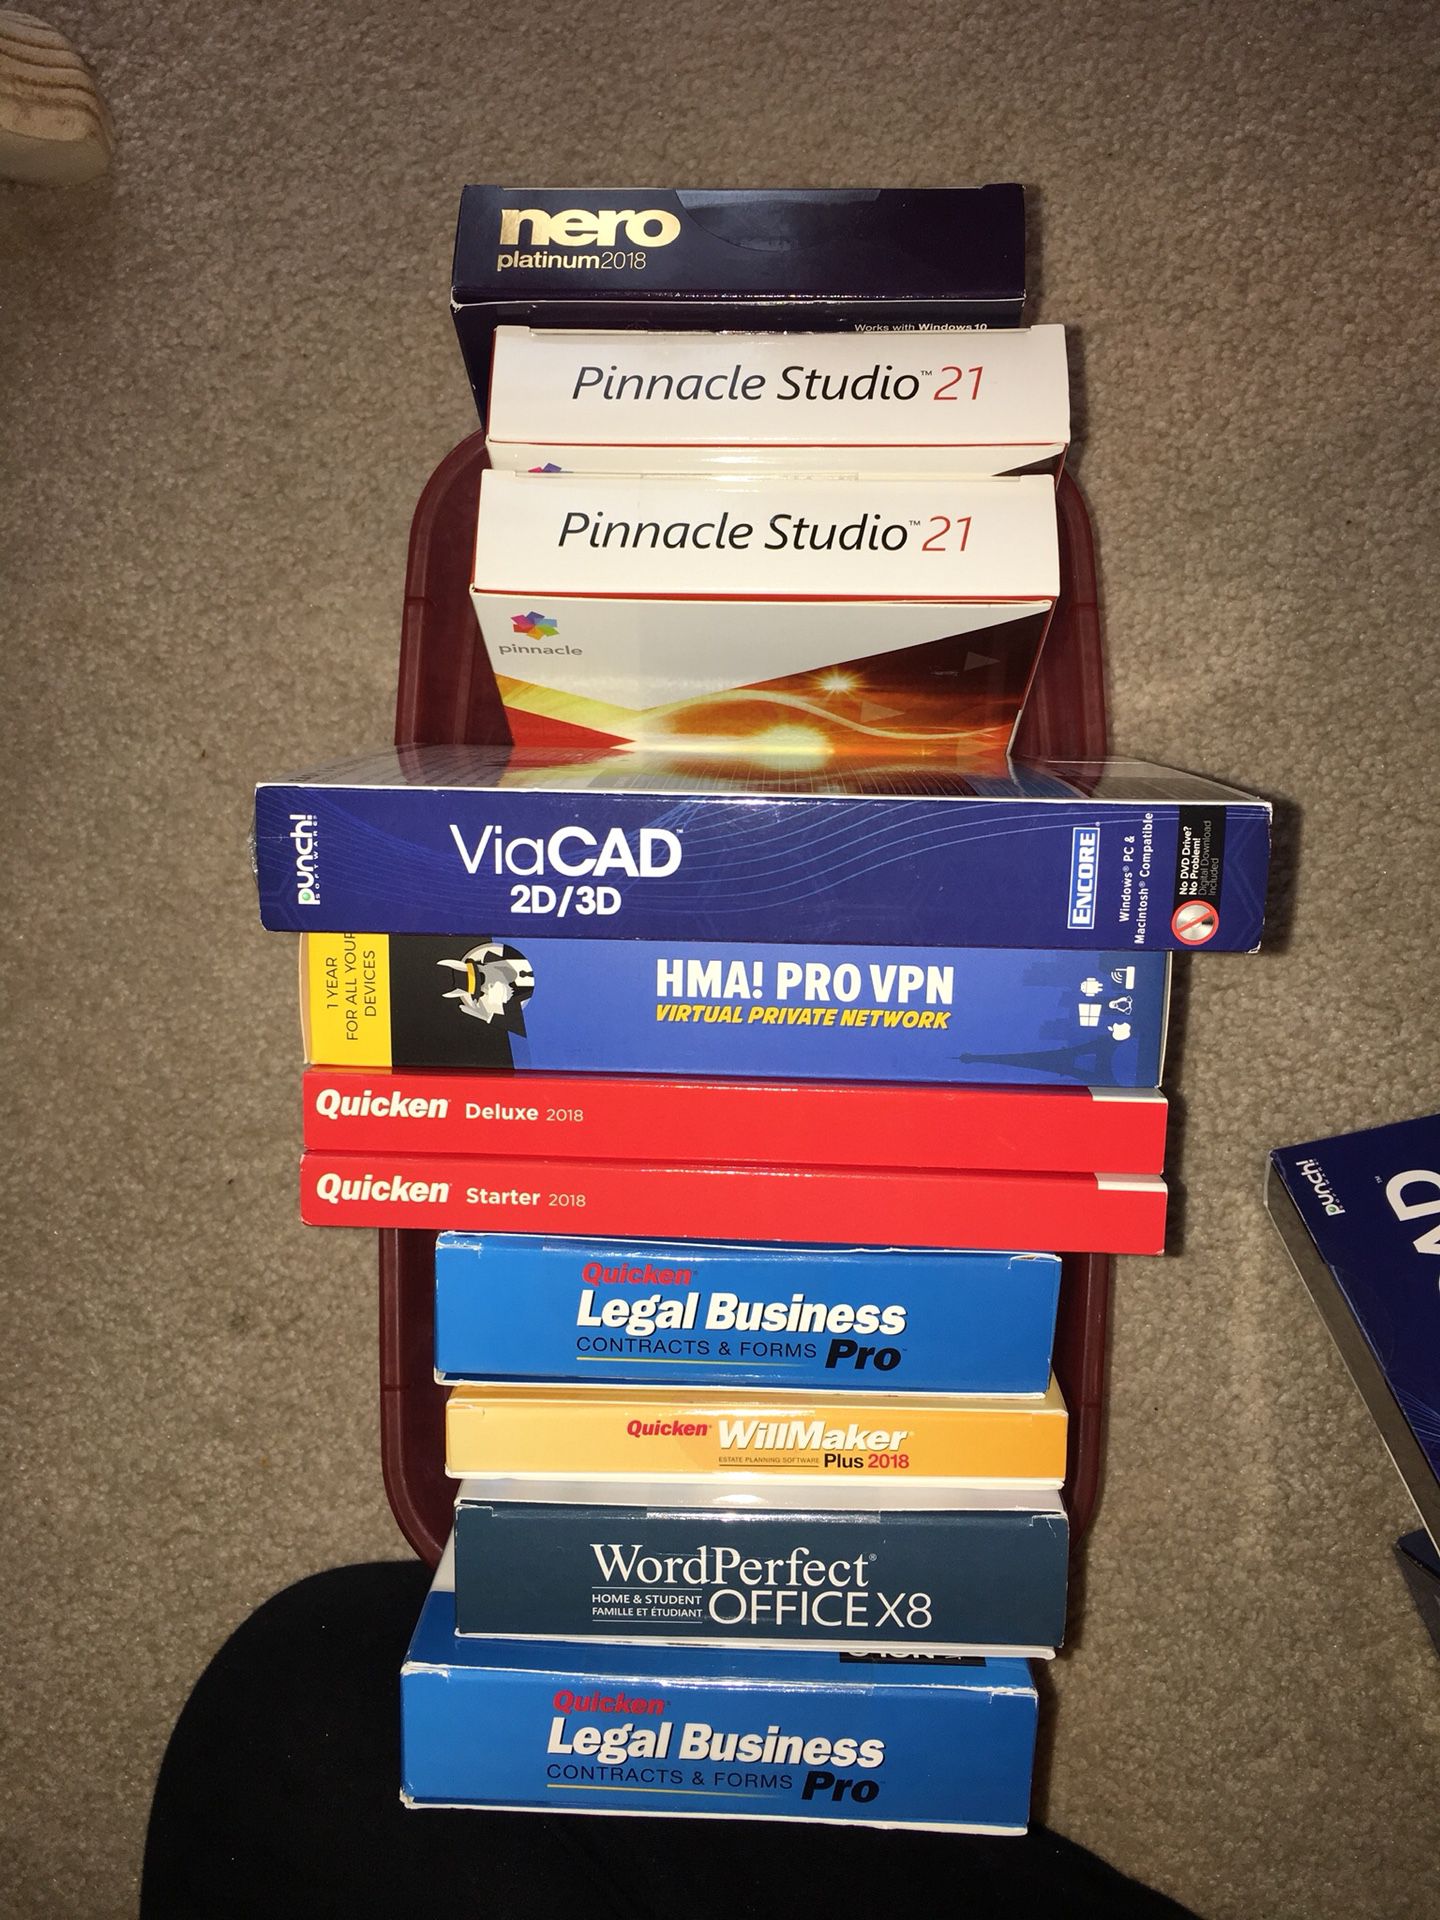 Huge lot of Brand new in packaging software!!’ 2018 versions